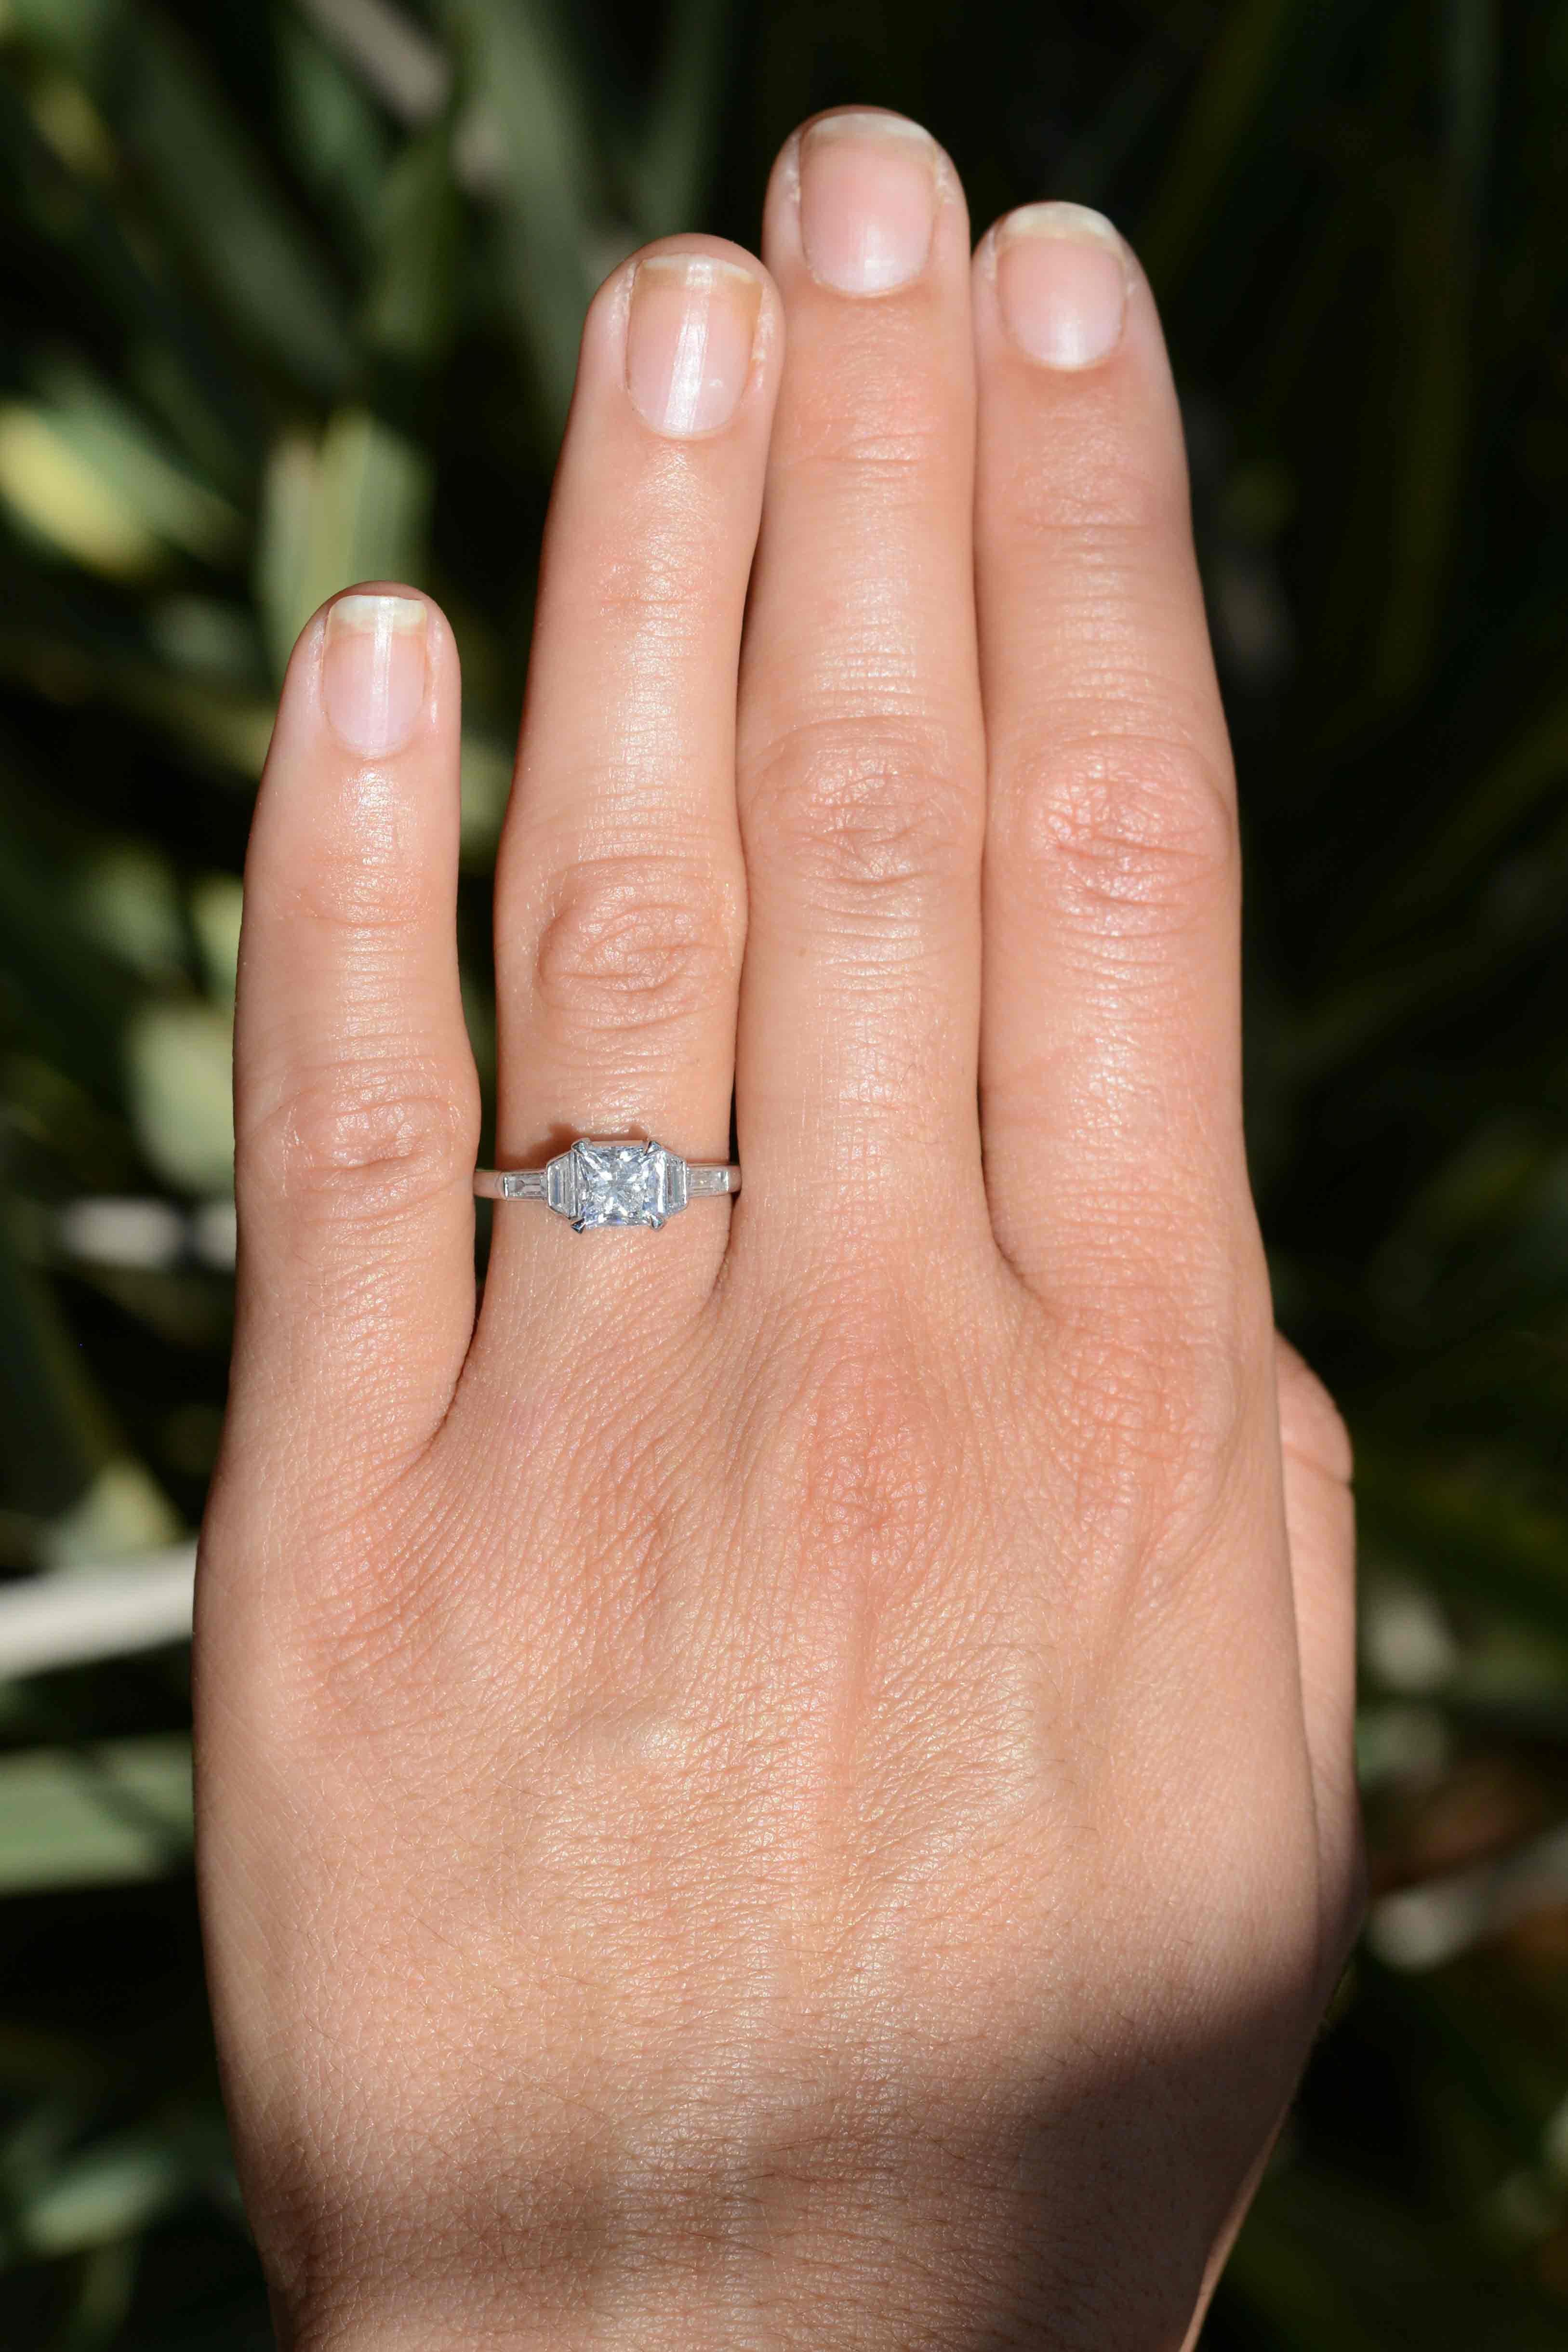 The La Jolla Art Deco 1 carat princess cut diamond engagement ring is an elegant bridal heirloom. The low setting is centered by an EGL certified sizzling F color square diamond, and the platinum solitaire smartly complimented by baguette and